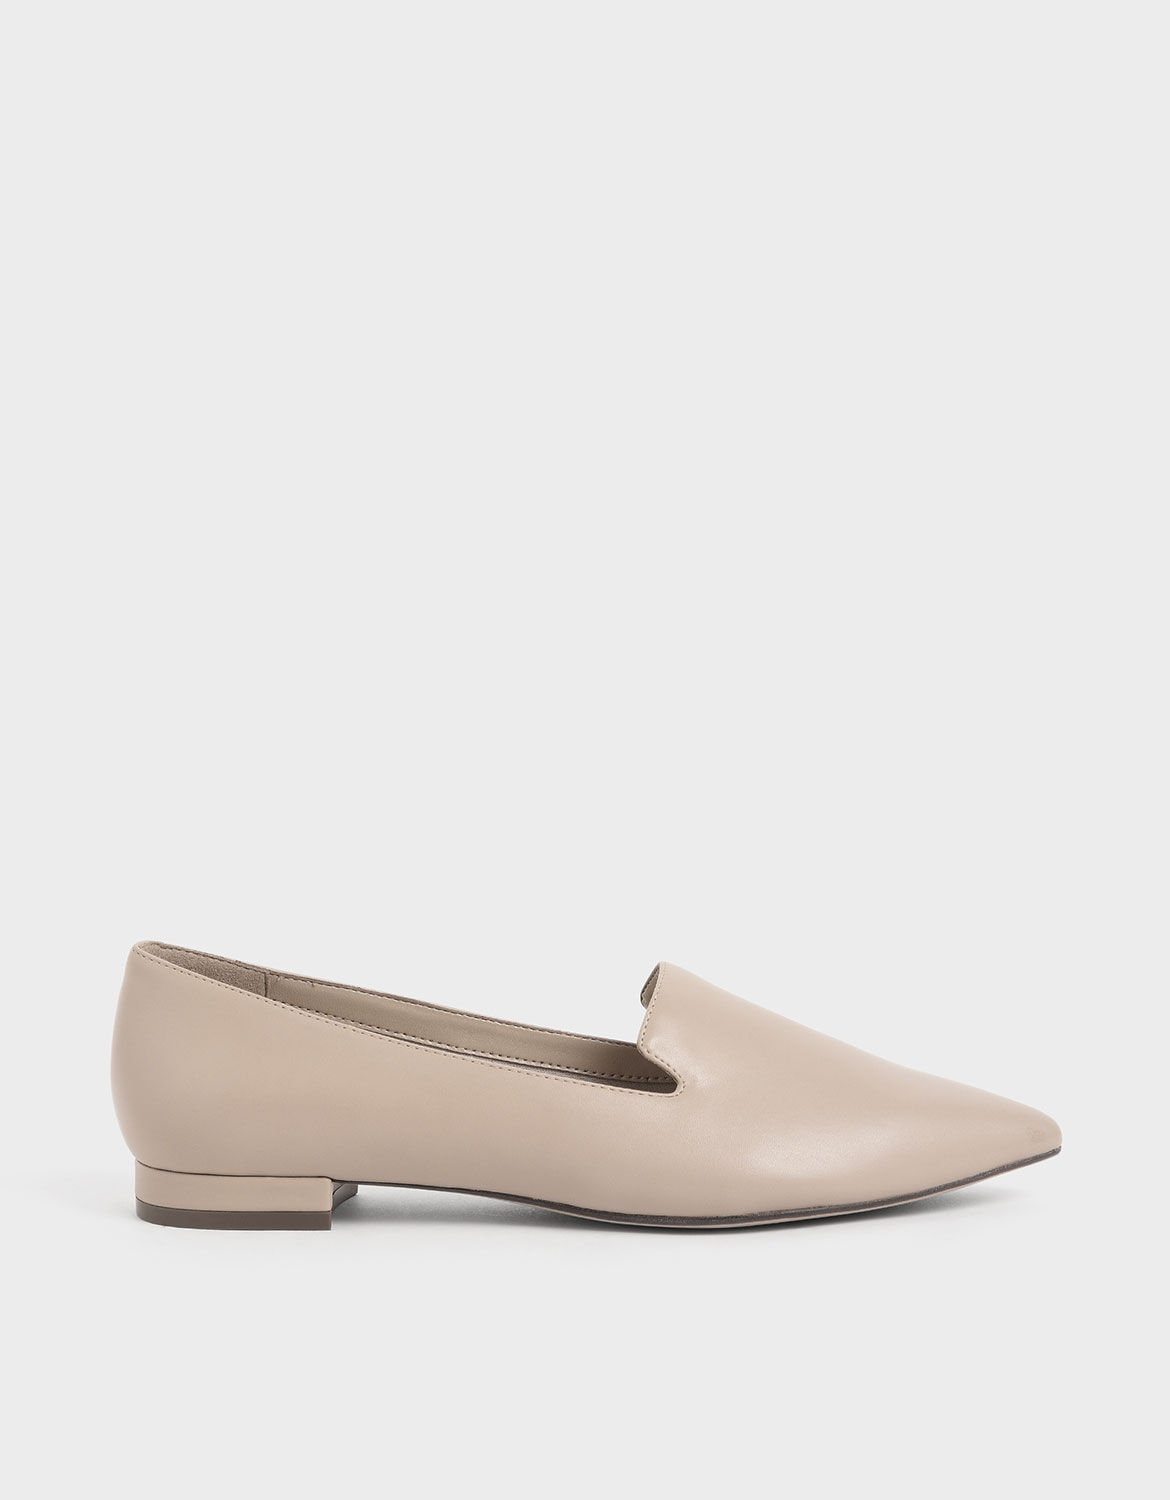 Beige Pointed Toe Loafer Flats 